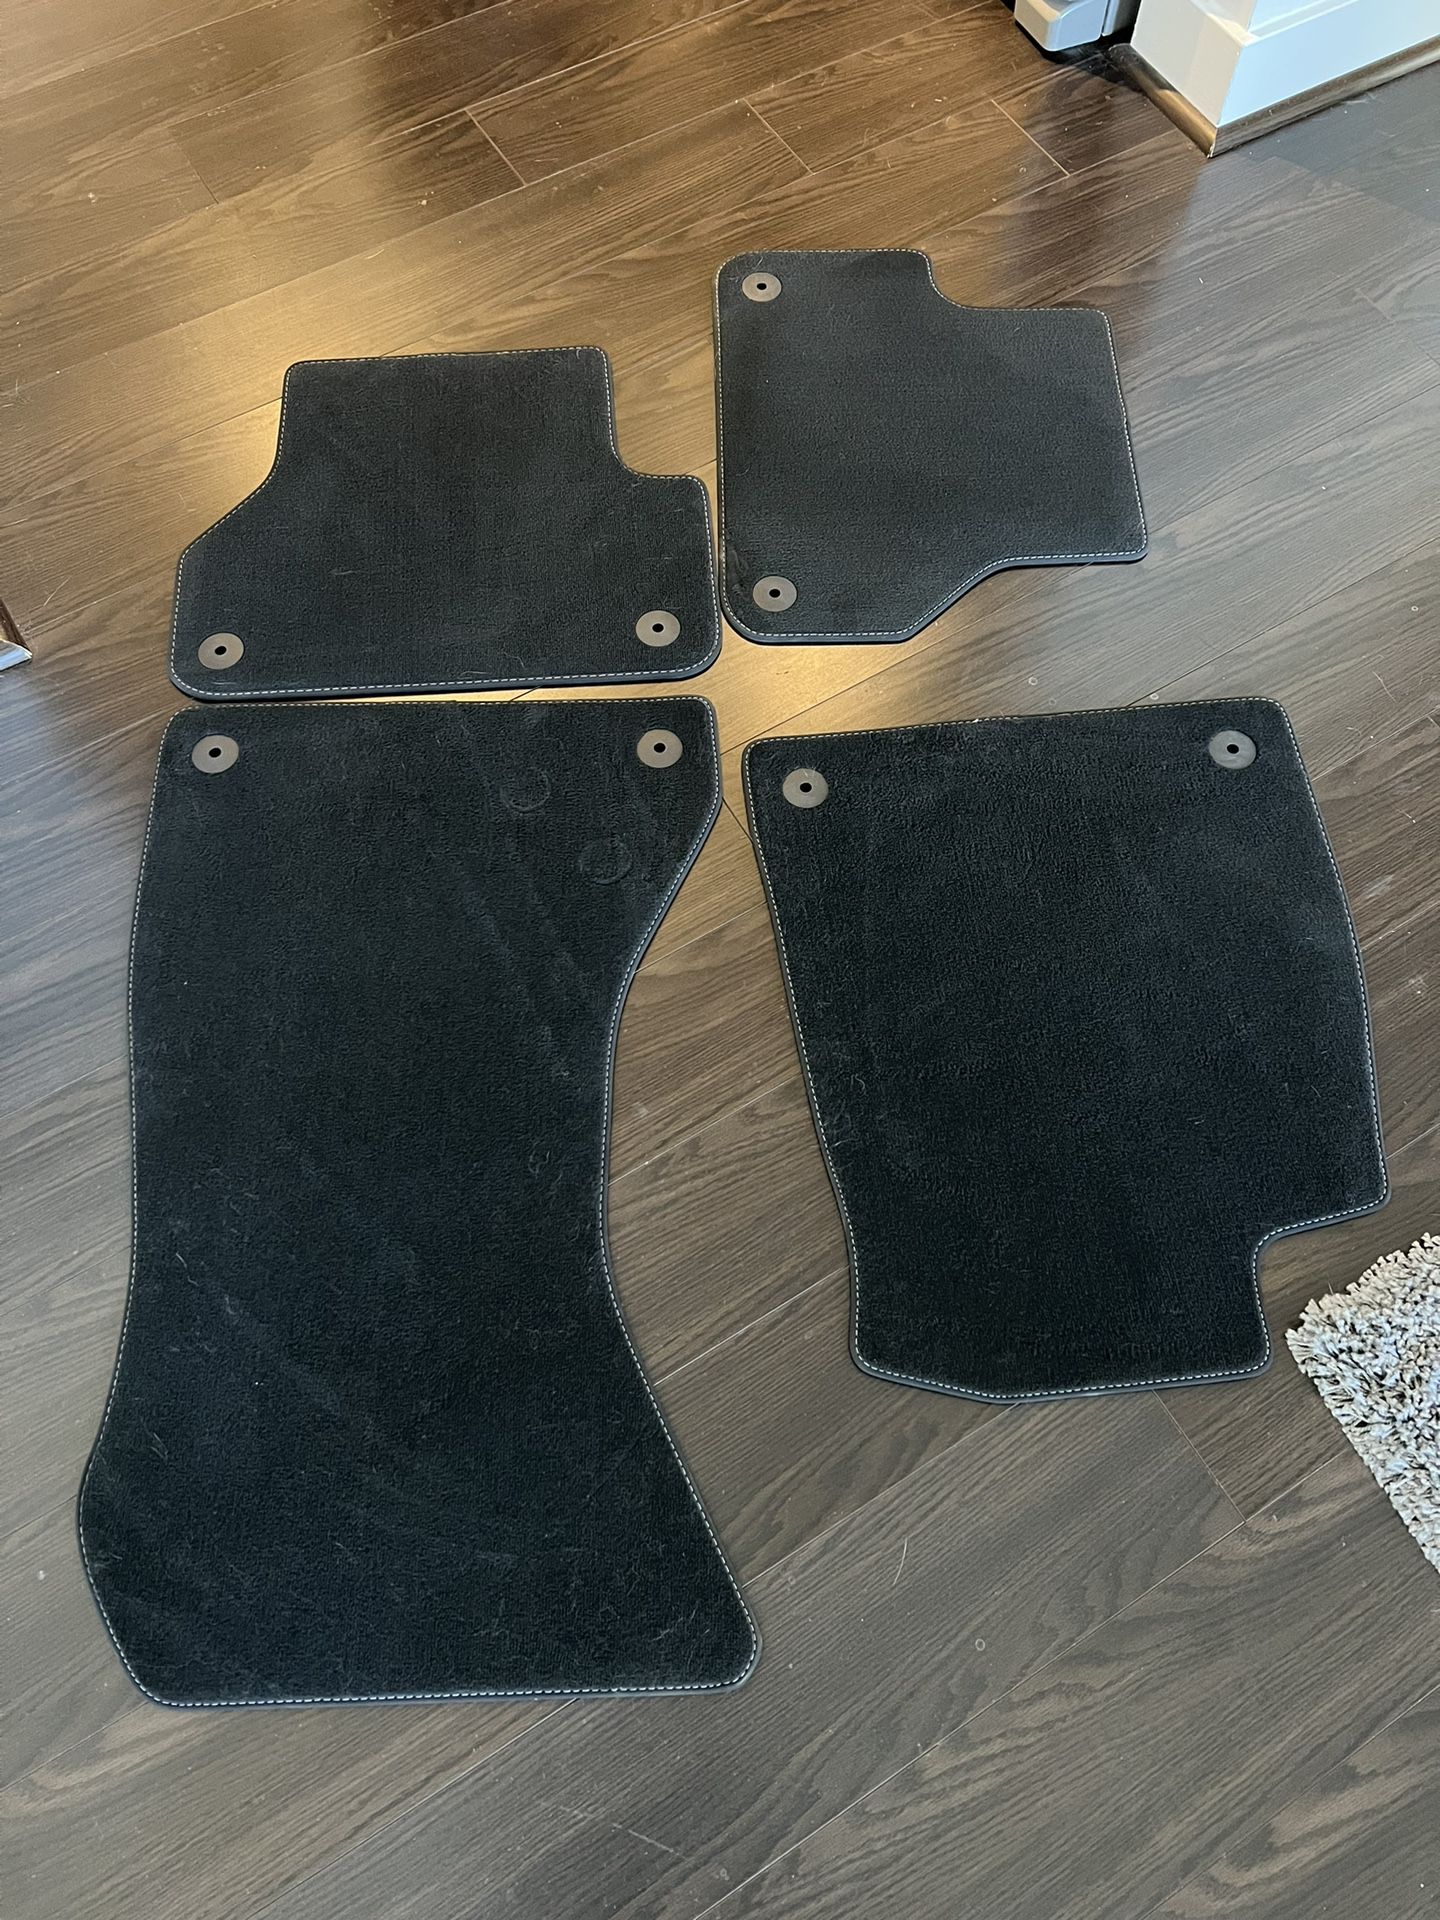 Audi S4 Textile Mats With clips Front And rear